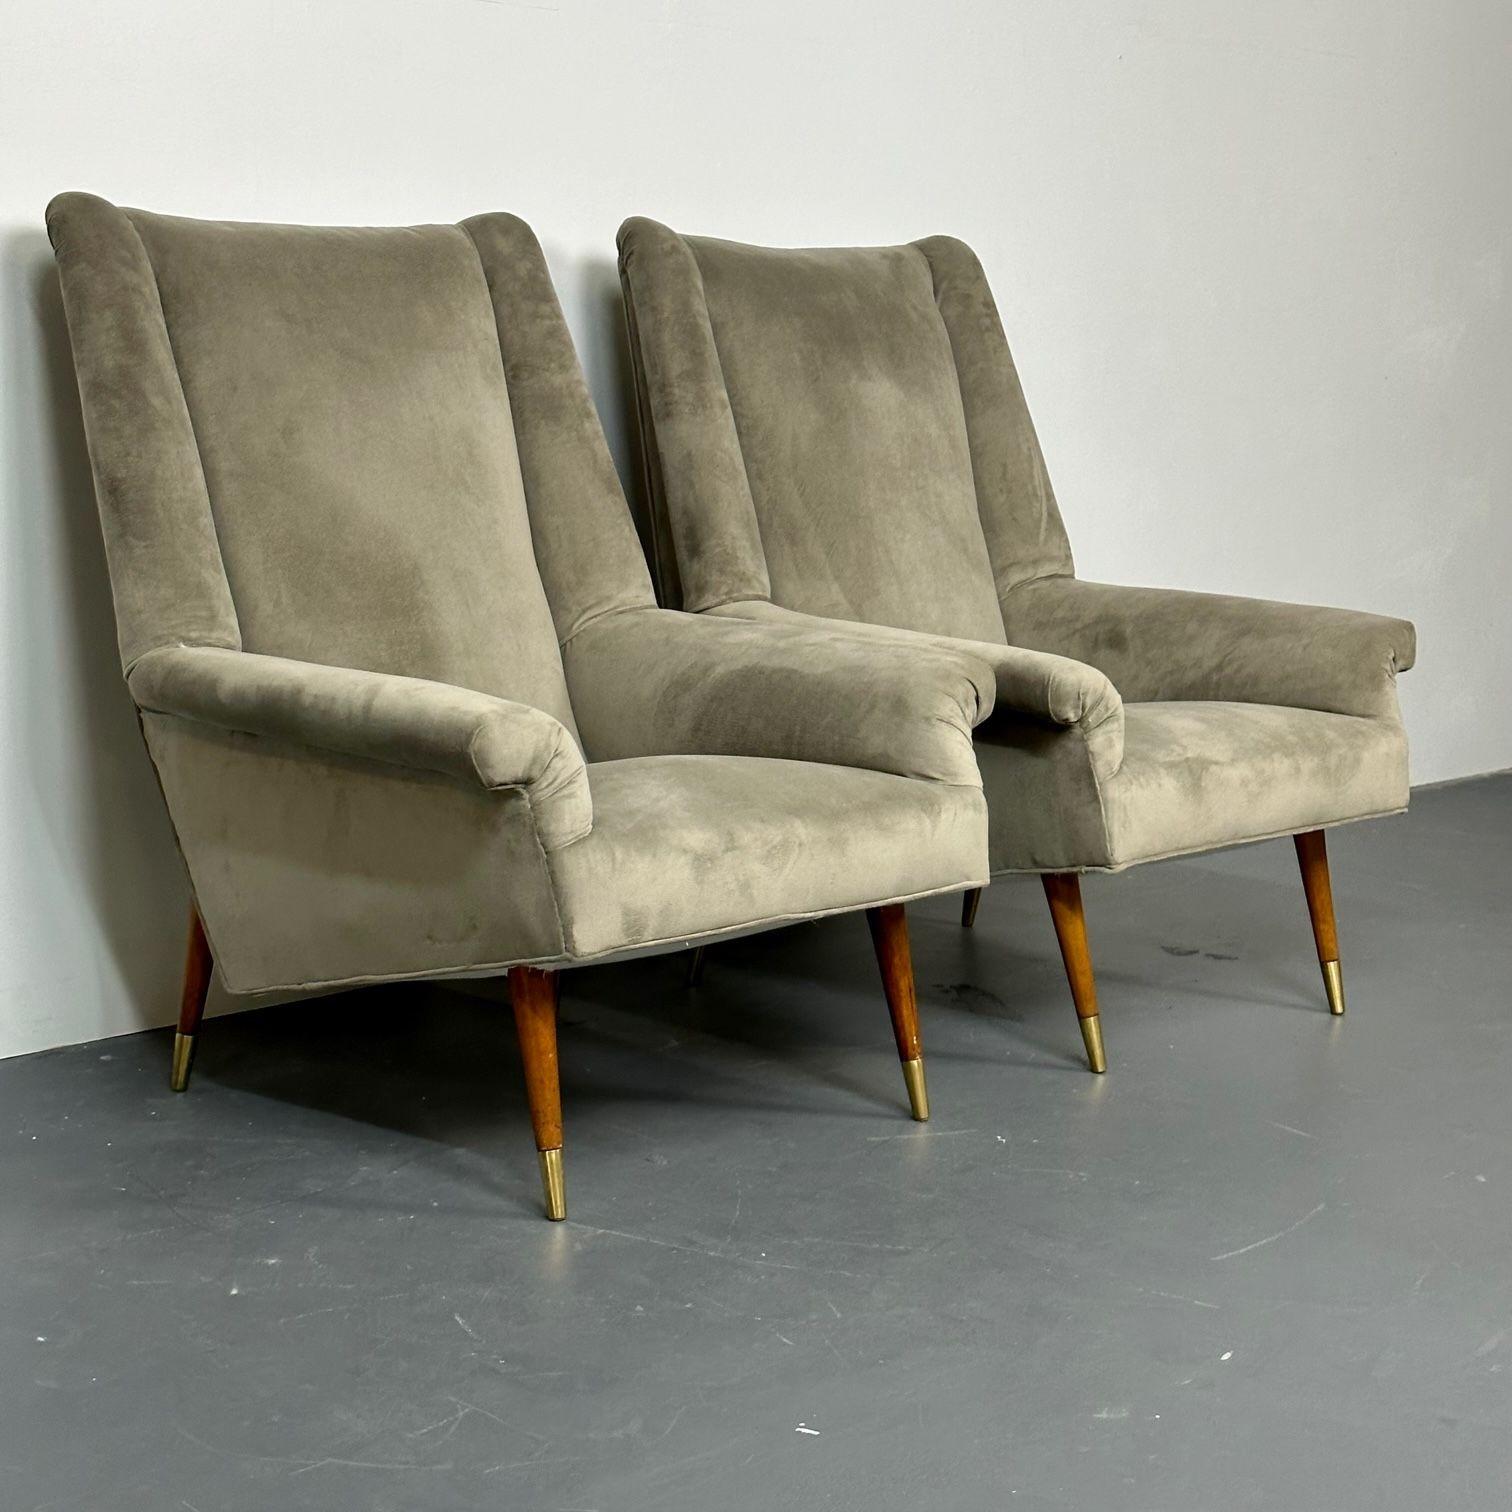 Gio Ponti Style, Mid-Century Modern, Wingback Chairs, Grey Velvet, Wood, 1950s In Good Condition For Sale In Stamford, CT